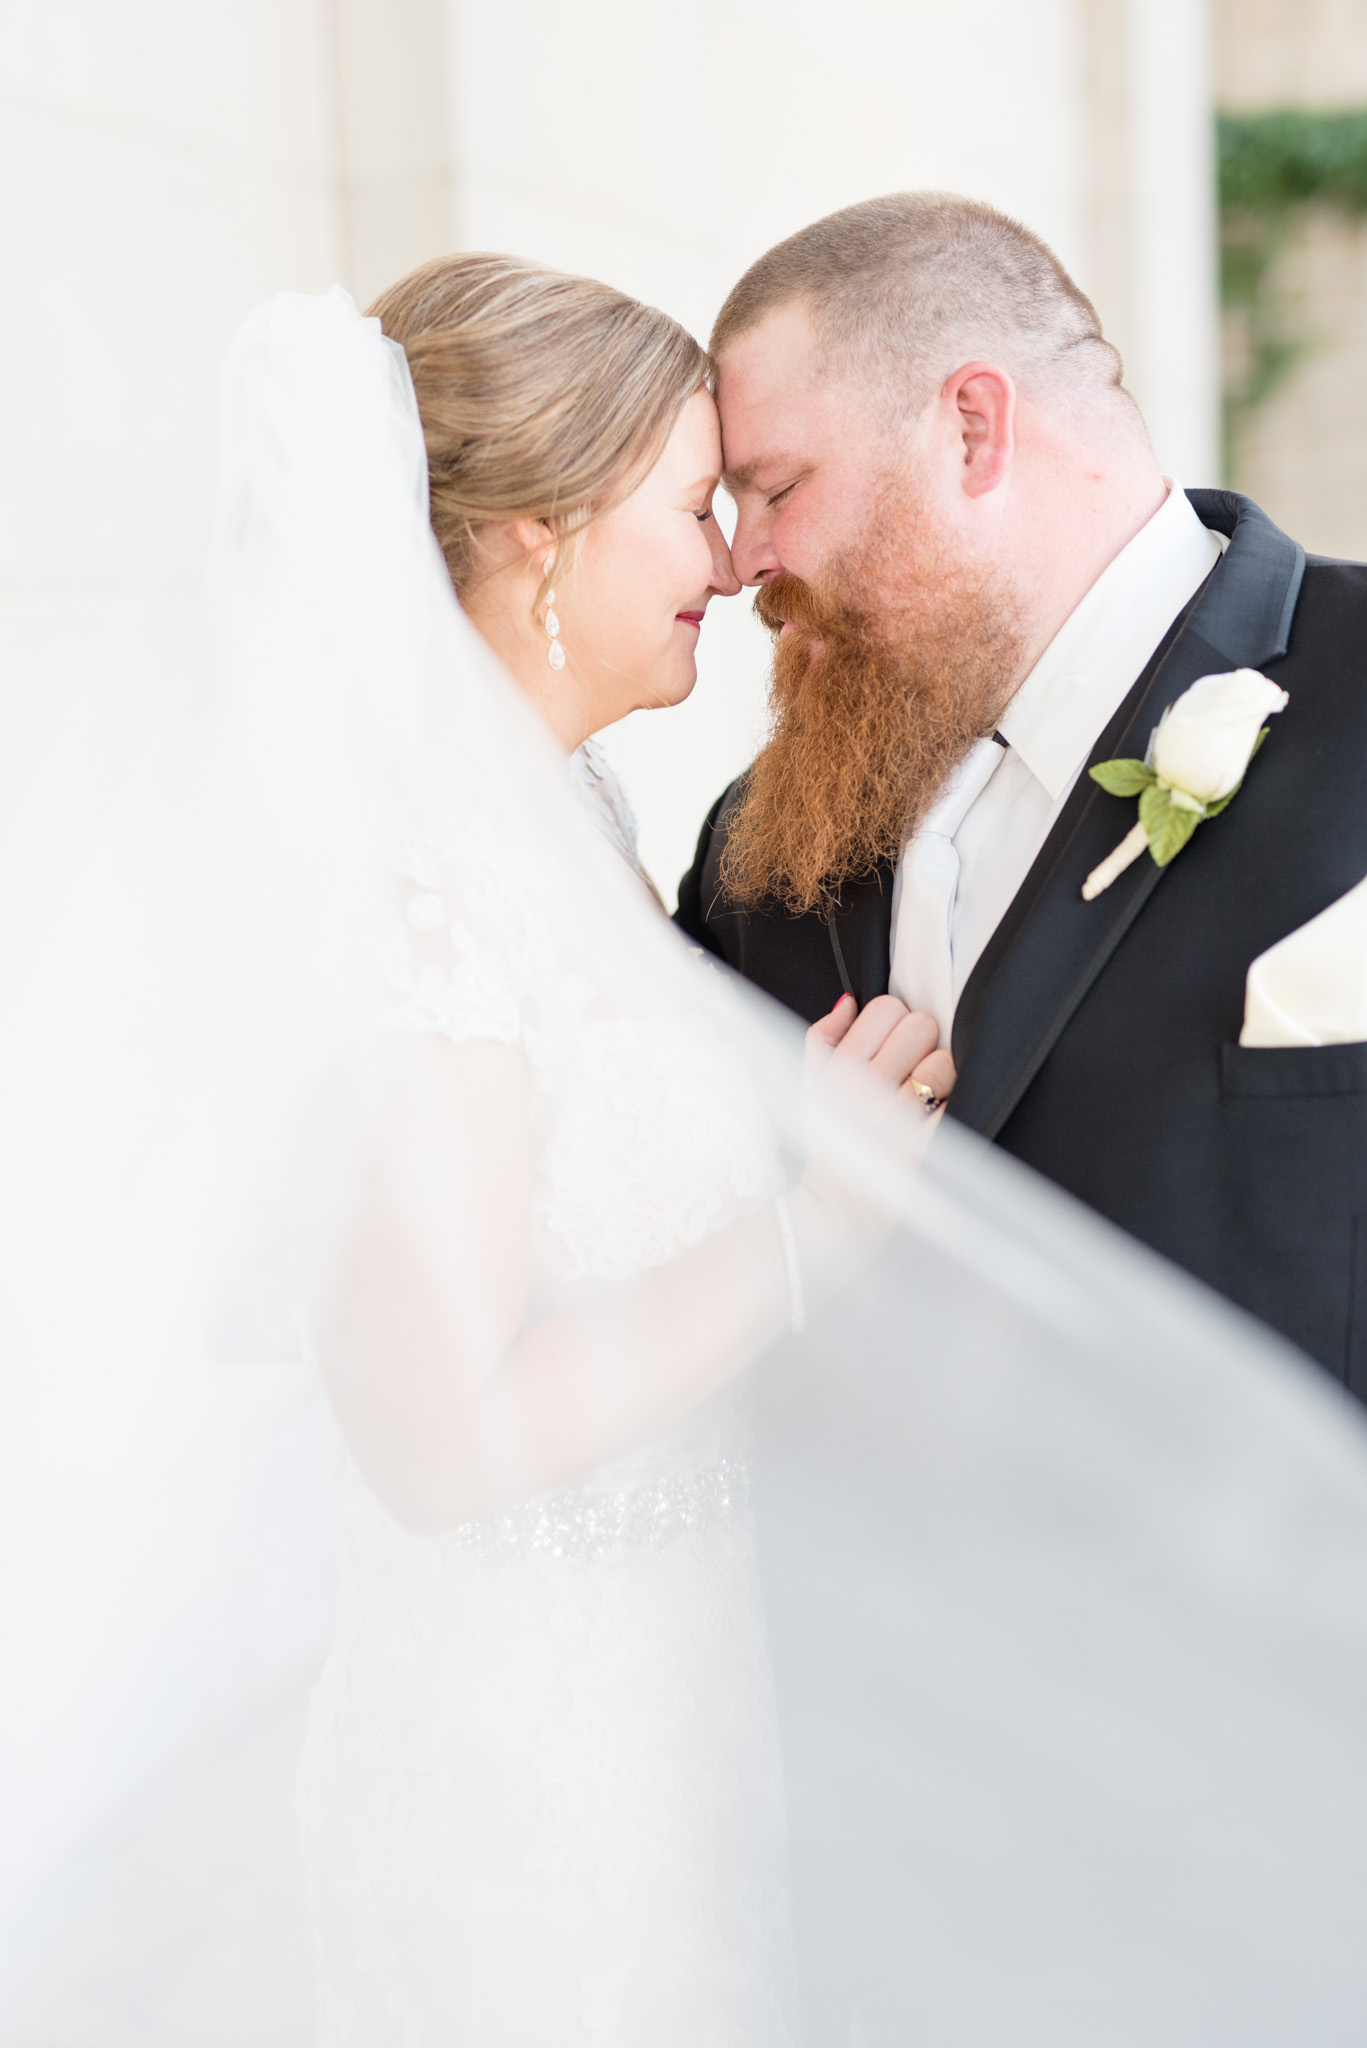 Bride and groom touch foreheads while veil blows.